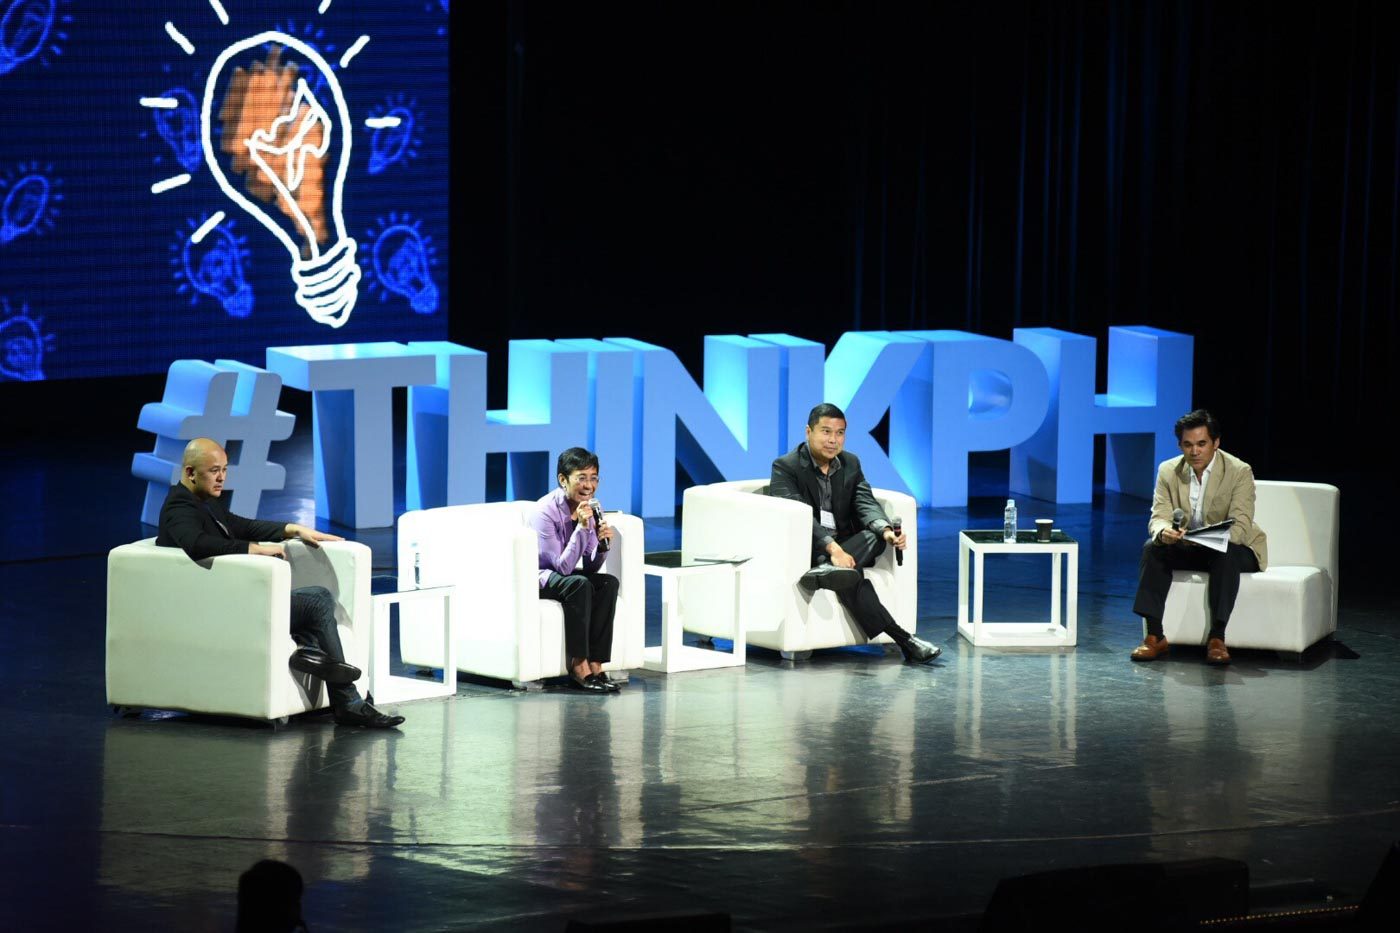 THE WAVE OF DISRUPTION HAS BEGUN. Paul Rivera, Maria Ressa, Nix Nolledo, and Manny Ayala discuss trends in digital. Photo by Martin San Diego/Rappler 